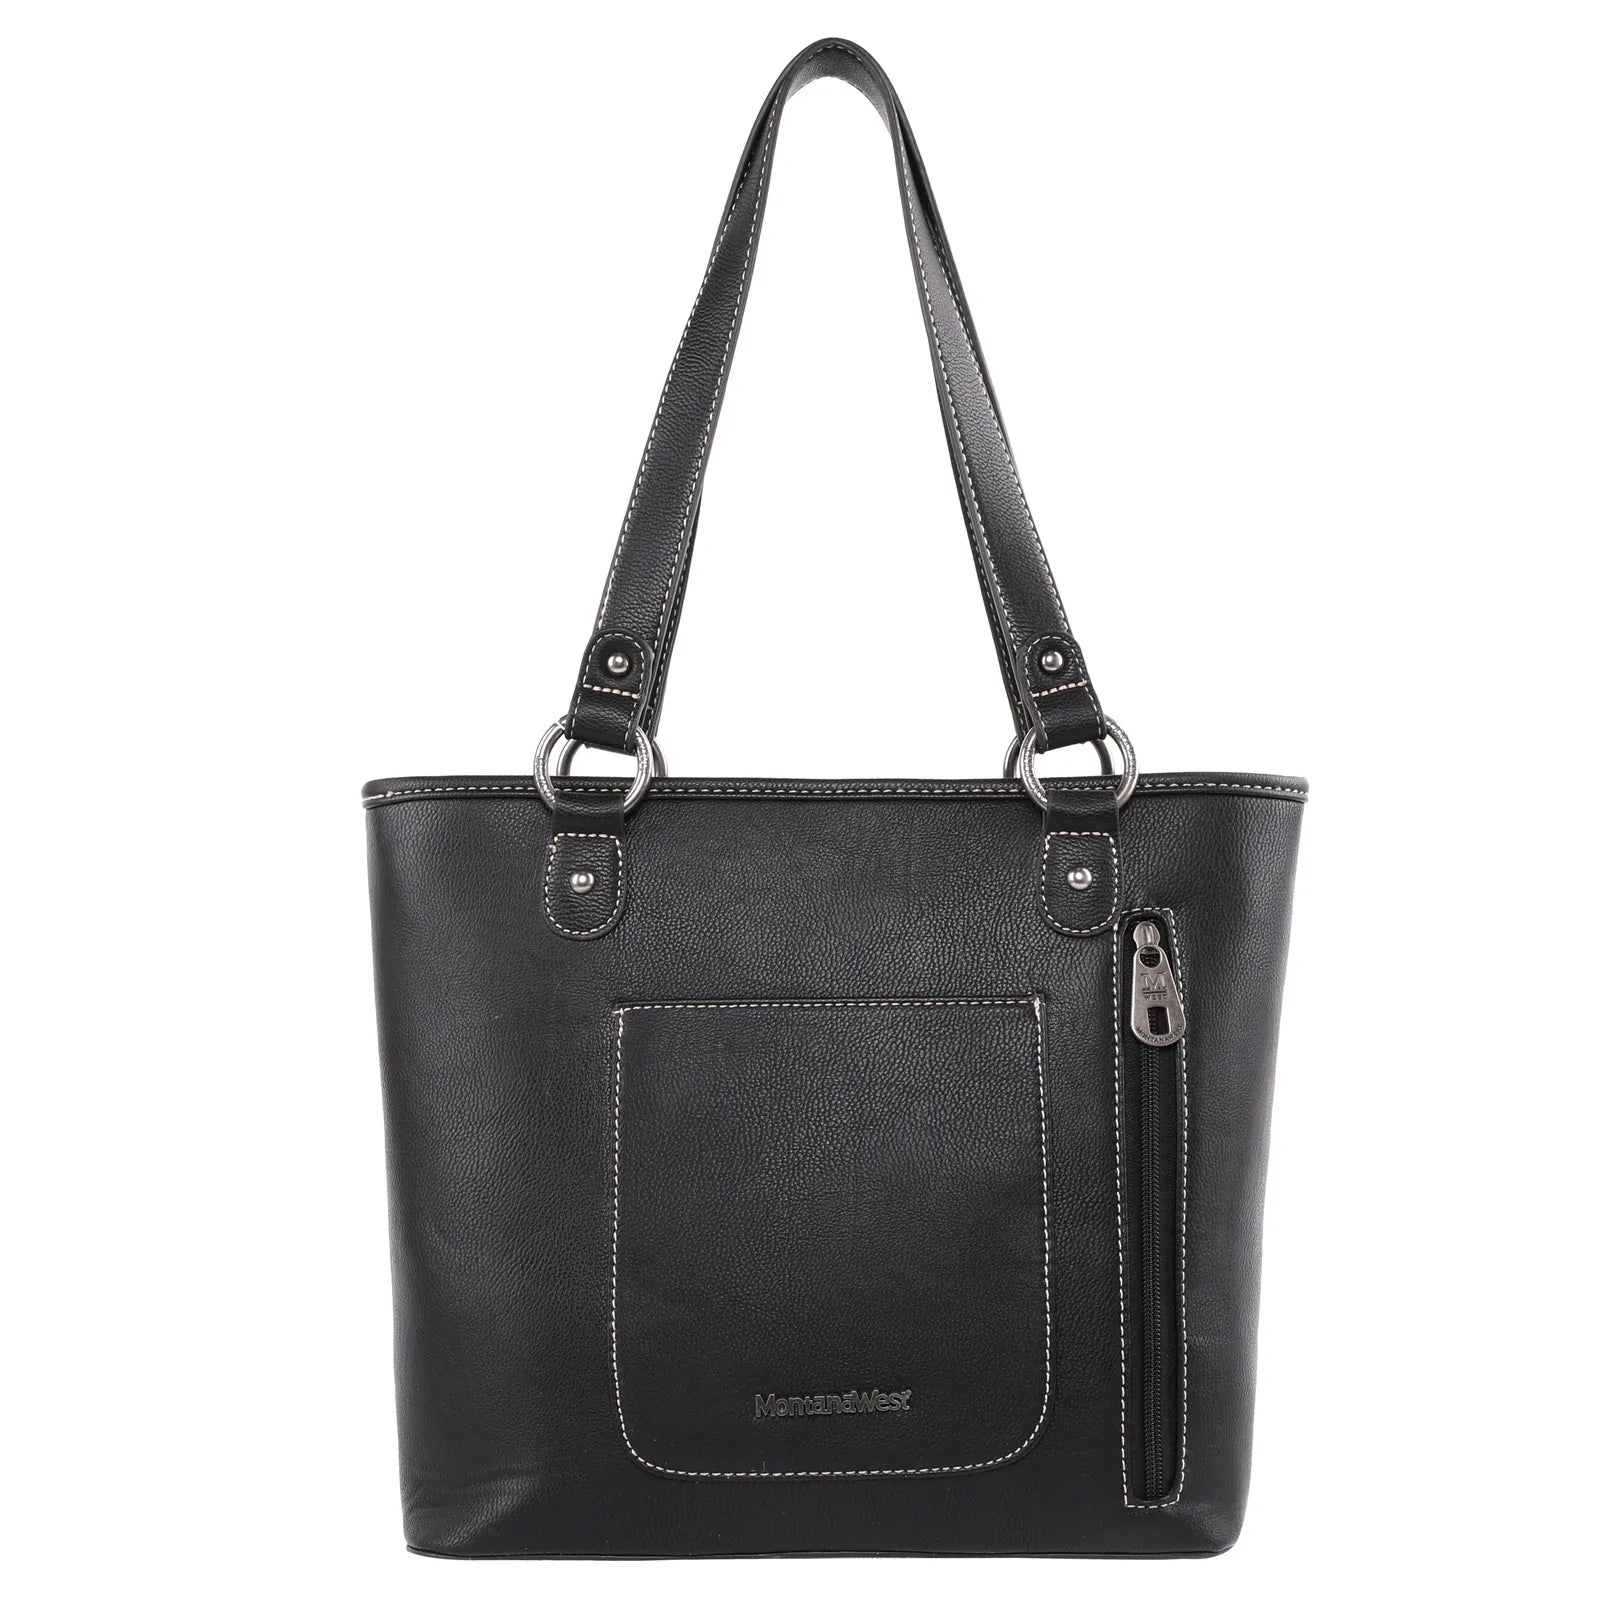 Fringe Collection Concealed Carry Tote